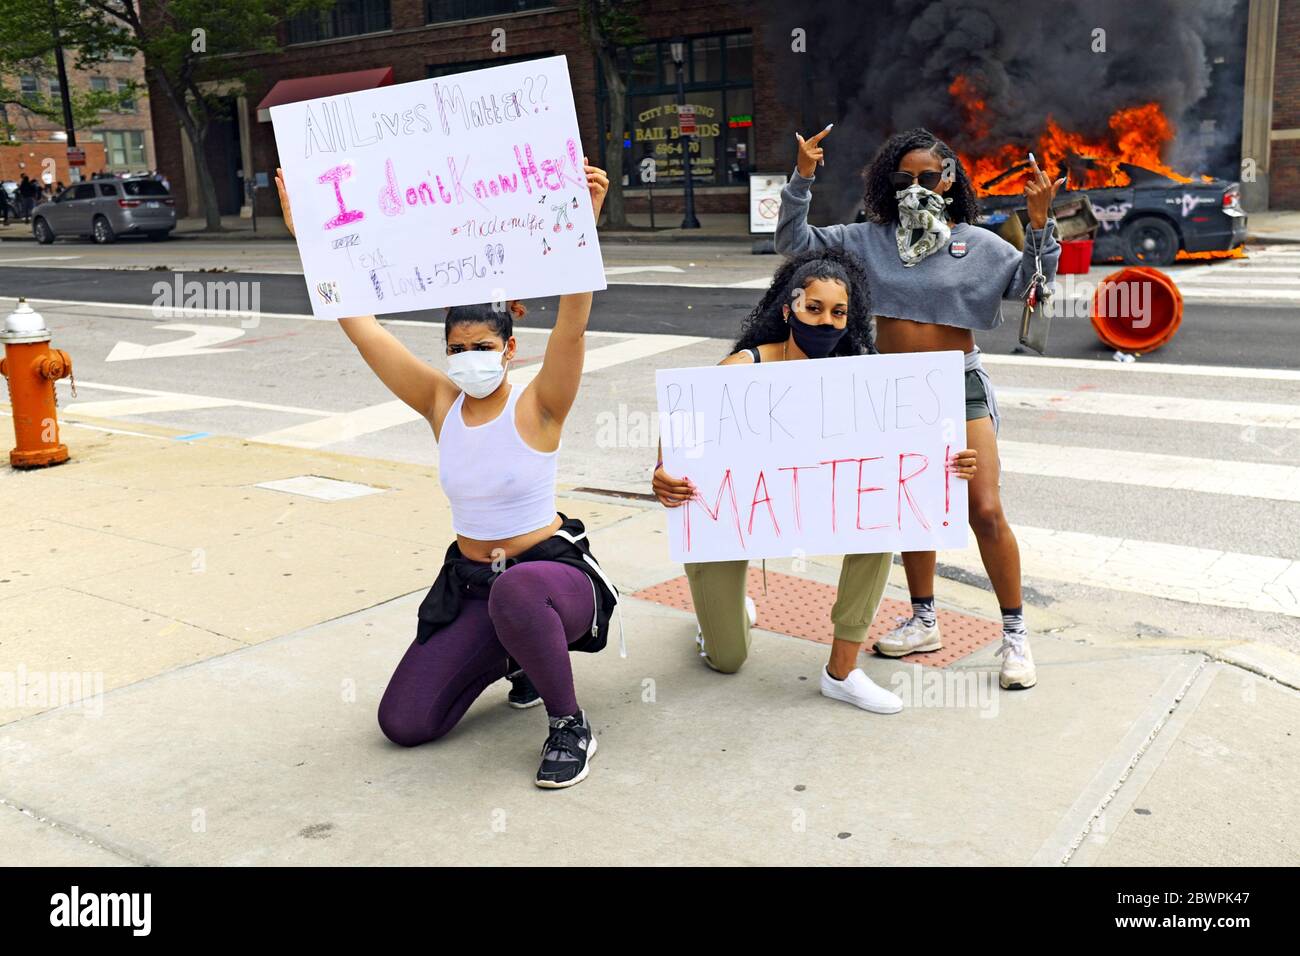 Three women pose with signs in front of two burning police cars in downtown Cleveland, Ohio, USA during a Black Lives Matter protest on May 30, 2020.  The three were among thousands who took to the streets in Cleveland to protest police policies, practices, and the killing of black people. Stock Photo